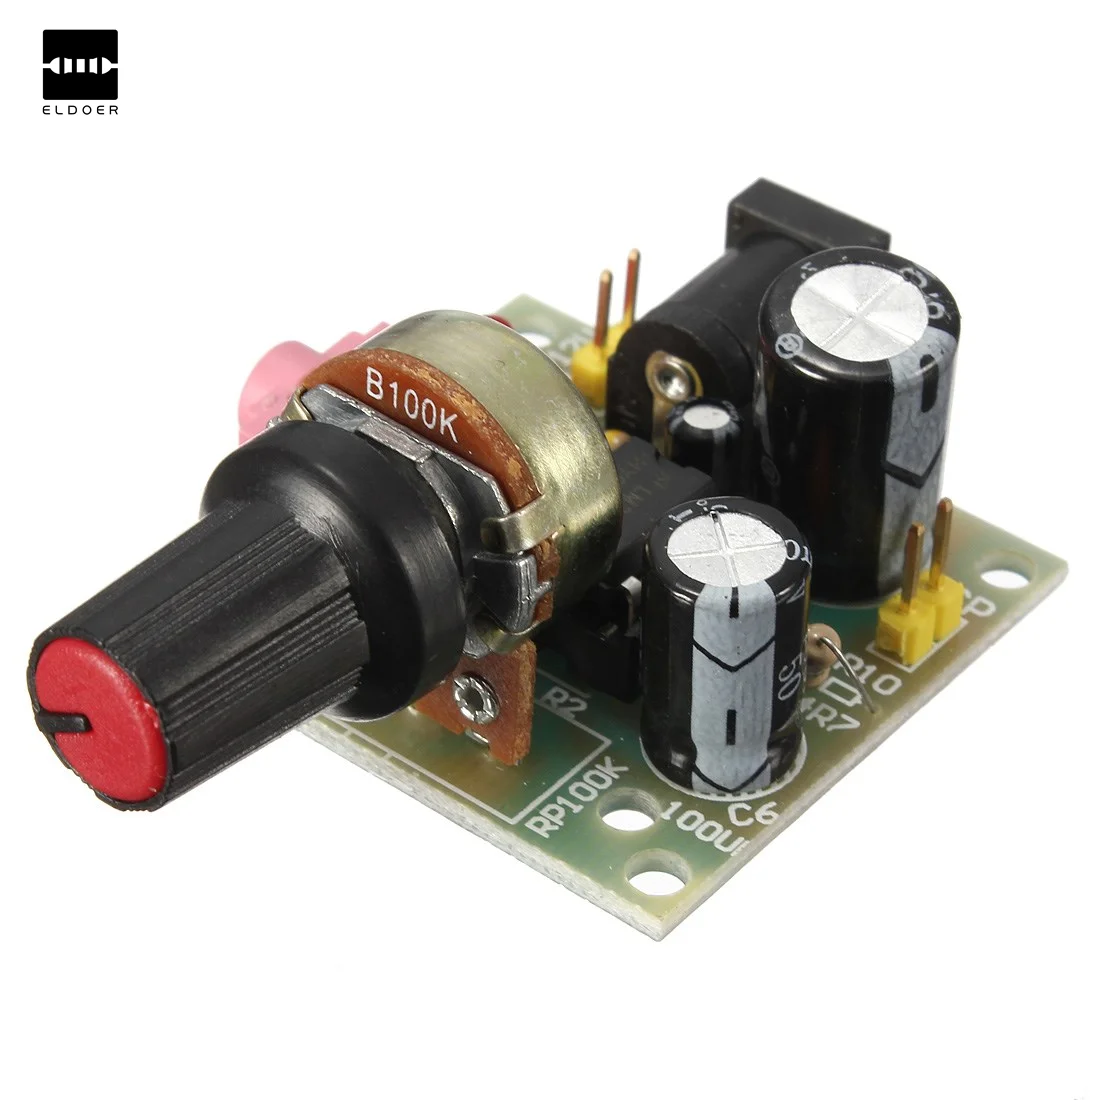 Top cofrLD Digital Stereo Power Amp Circuit LM3886TF Small